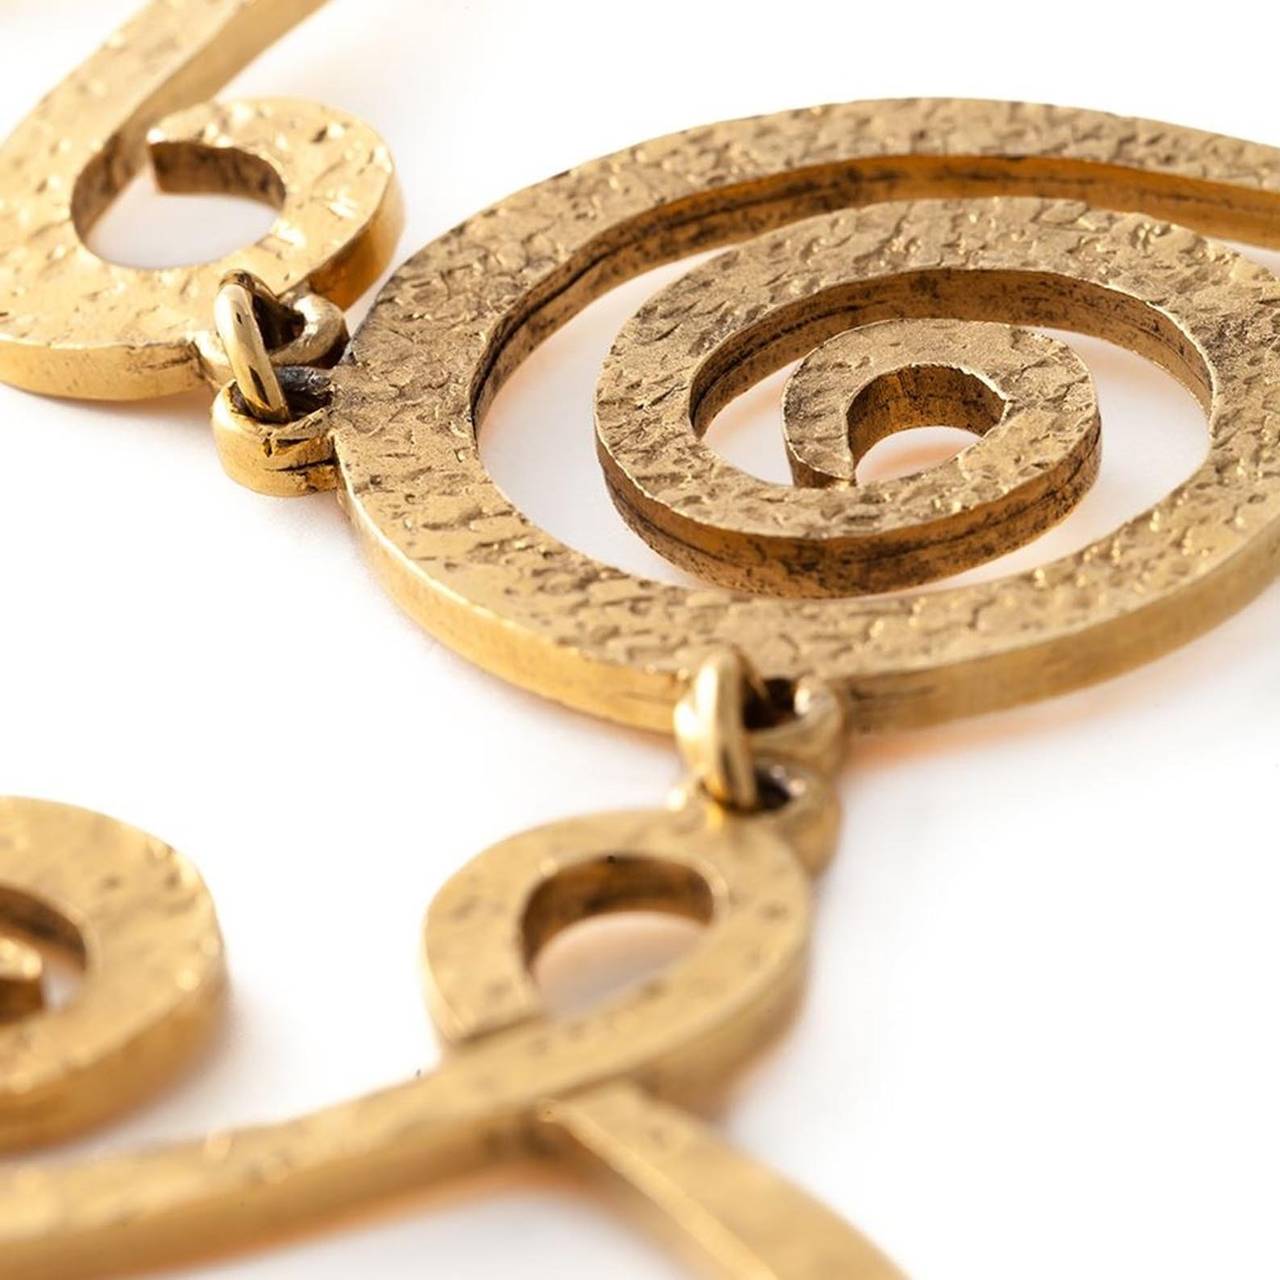 This stunning vintage necklace from Chanel features a Gold-tone swirl design and a torque closure.

Measurements: Width: 9cm, Circumference: 47cm

Material: Gold-tone Metal

Colour: Gold